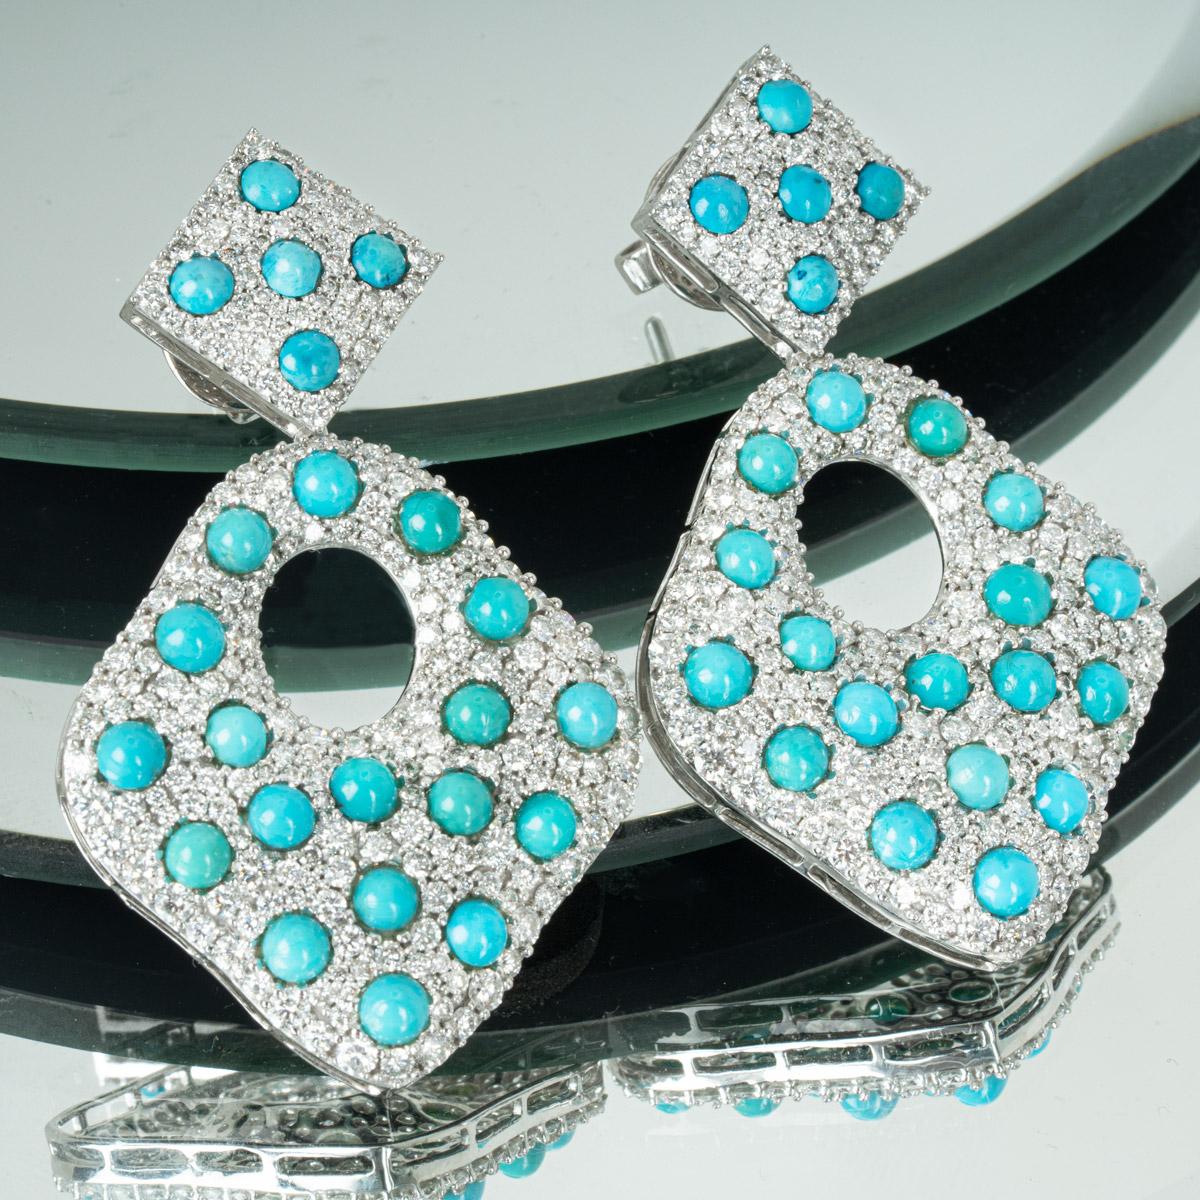 Diamond and Turquoise Drop Earrings 6.02 Carats For Sale 2